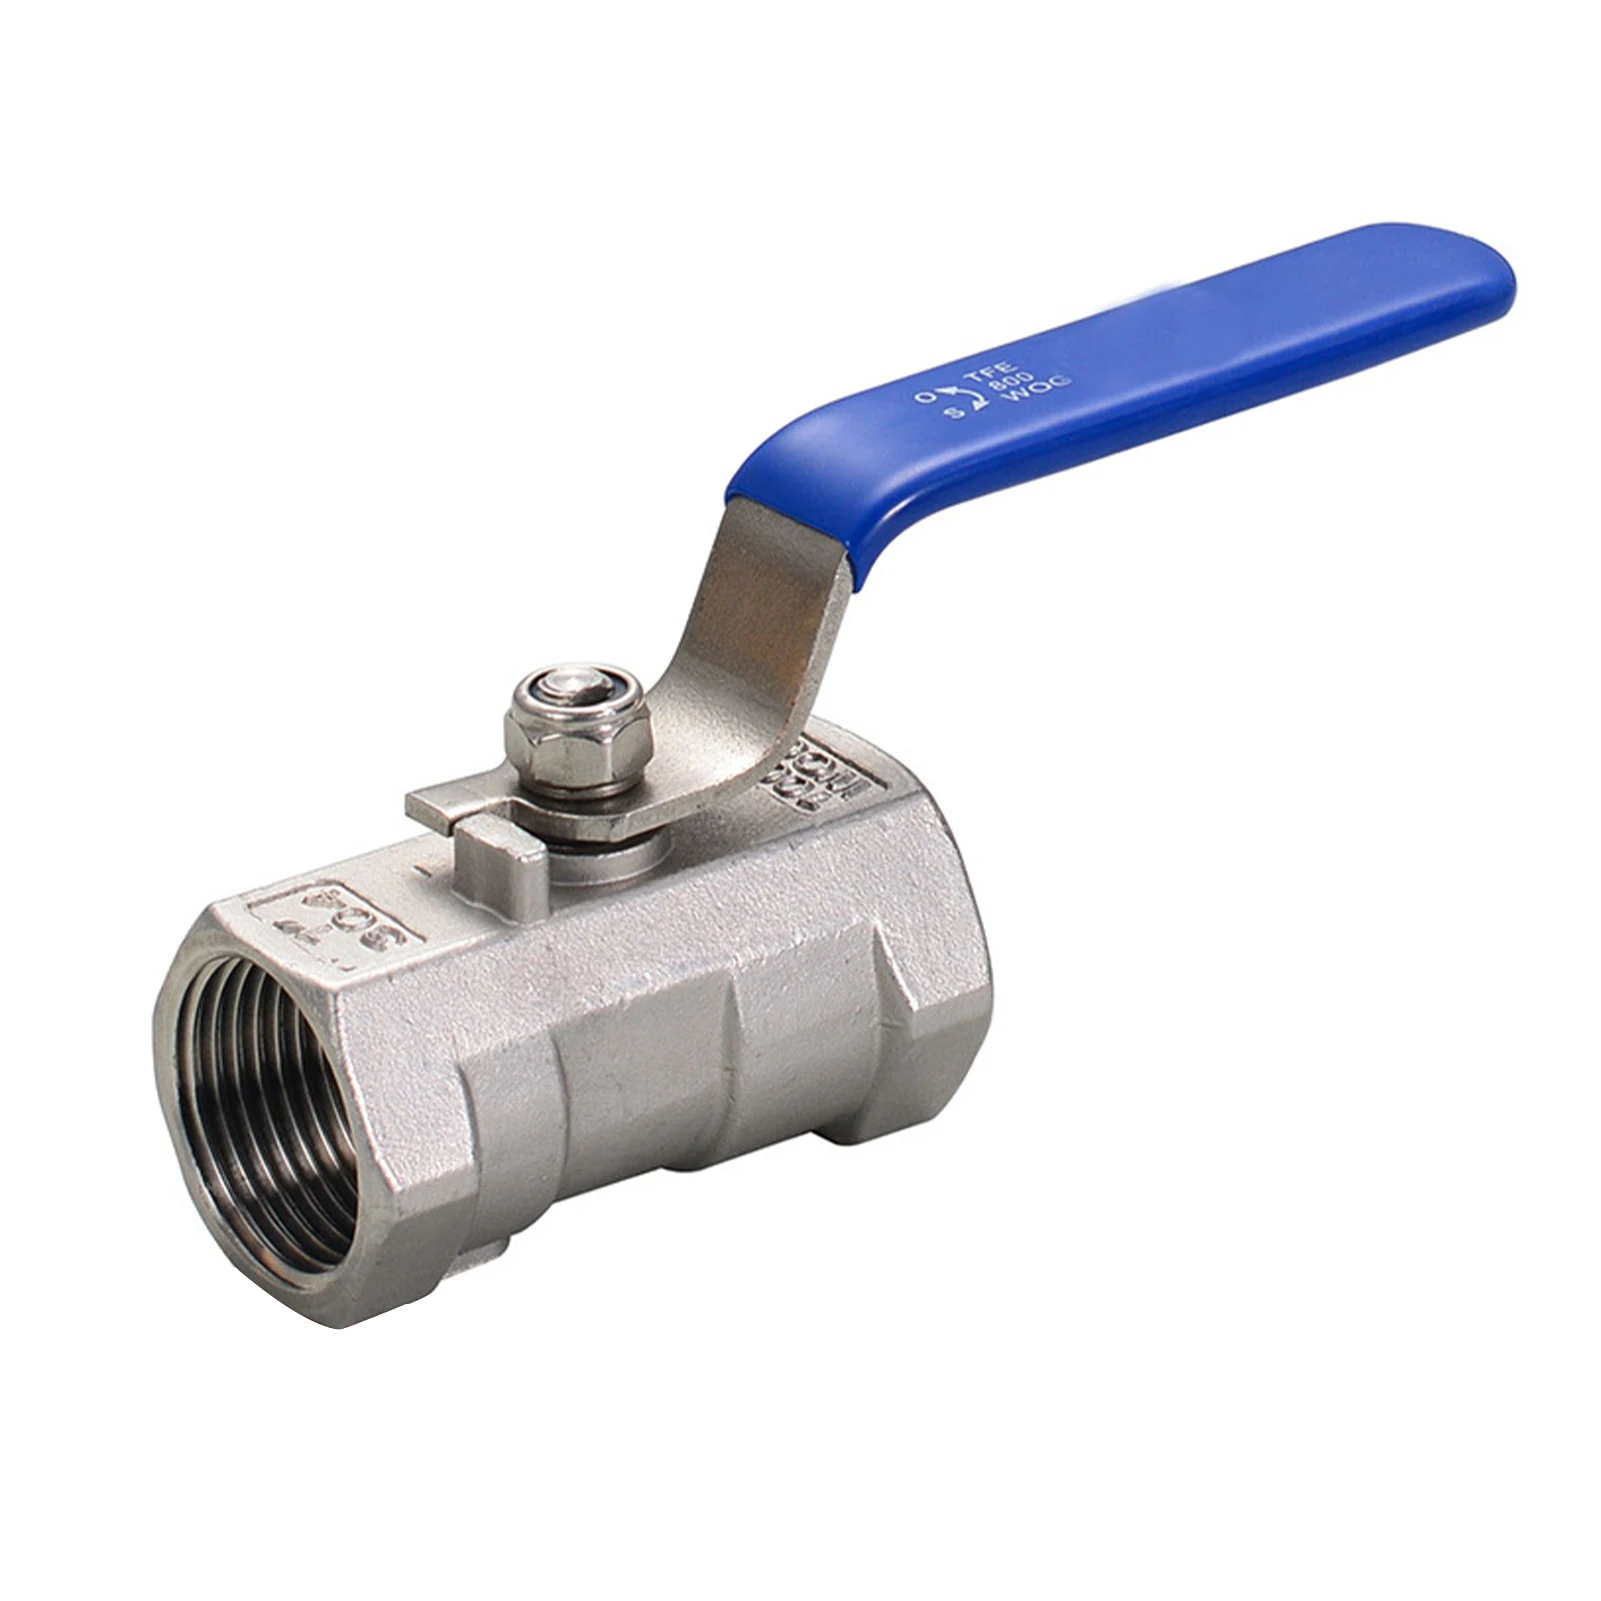 

Ball Valve With Handle Easy Install Internal Thread Home Professional Practical 1-1/2inch DN40 Steam Durable Gas Stainless Steel